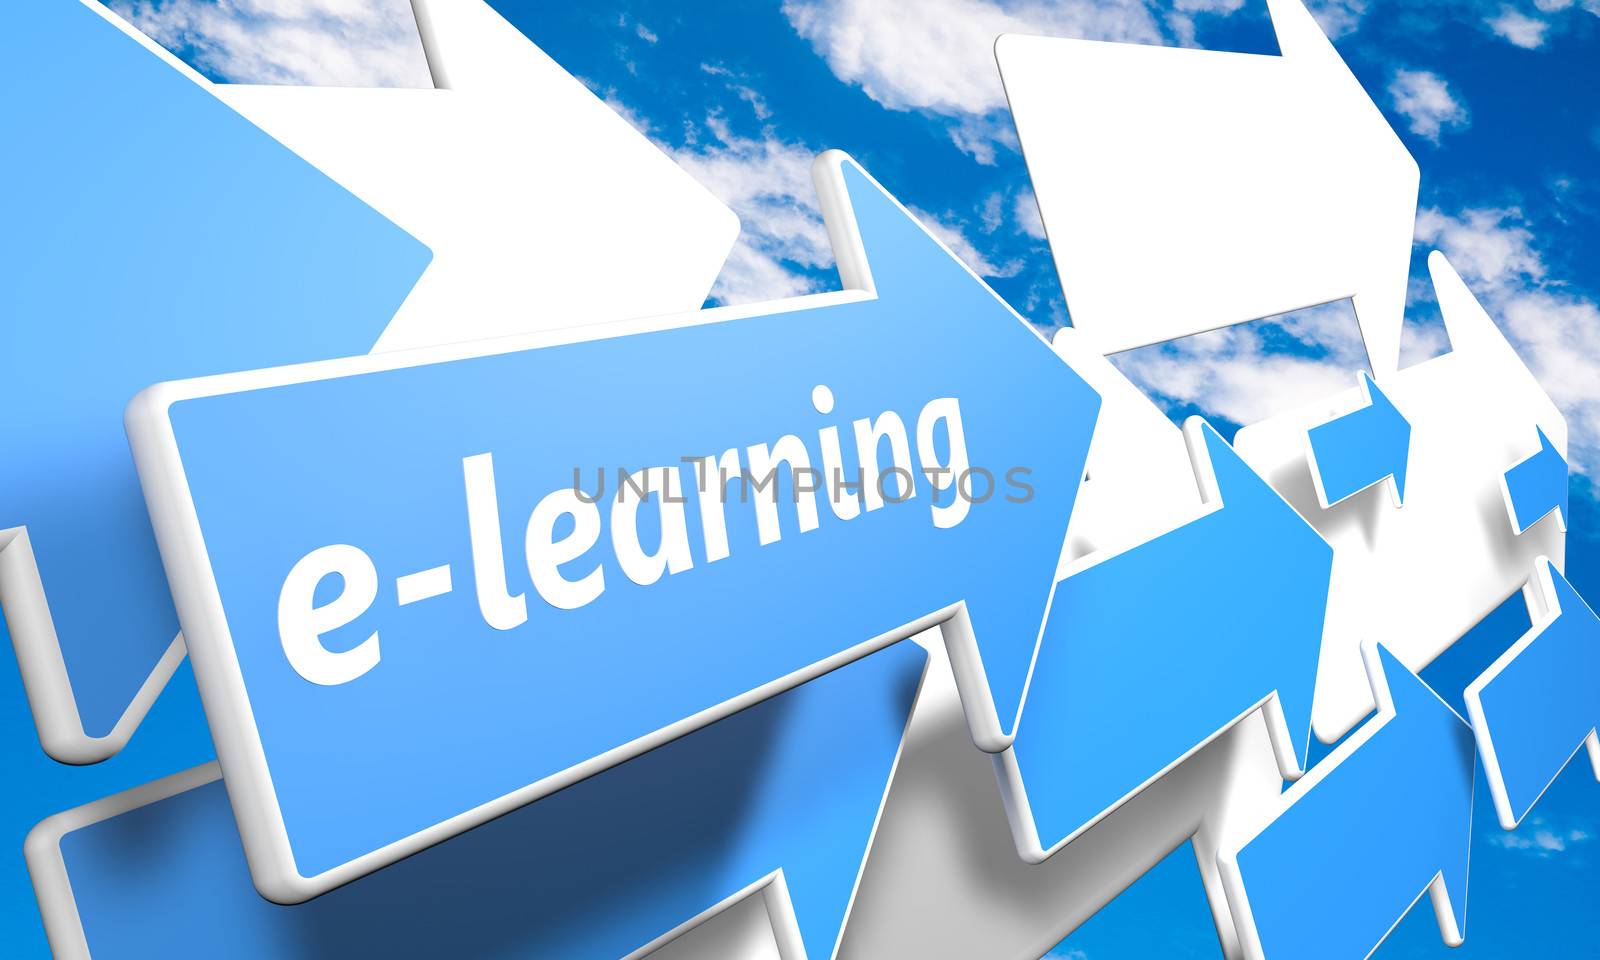 E-learning 3d render concept with blue and white arrows flying in a blue sky with clouds